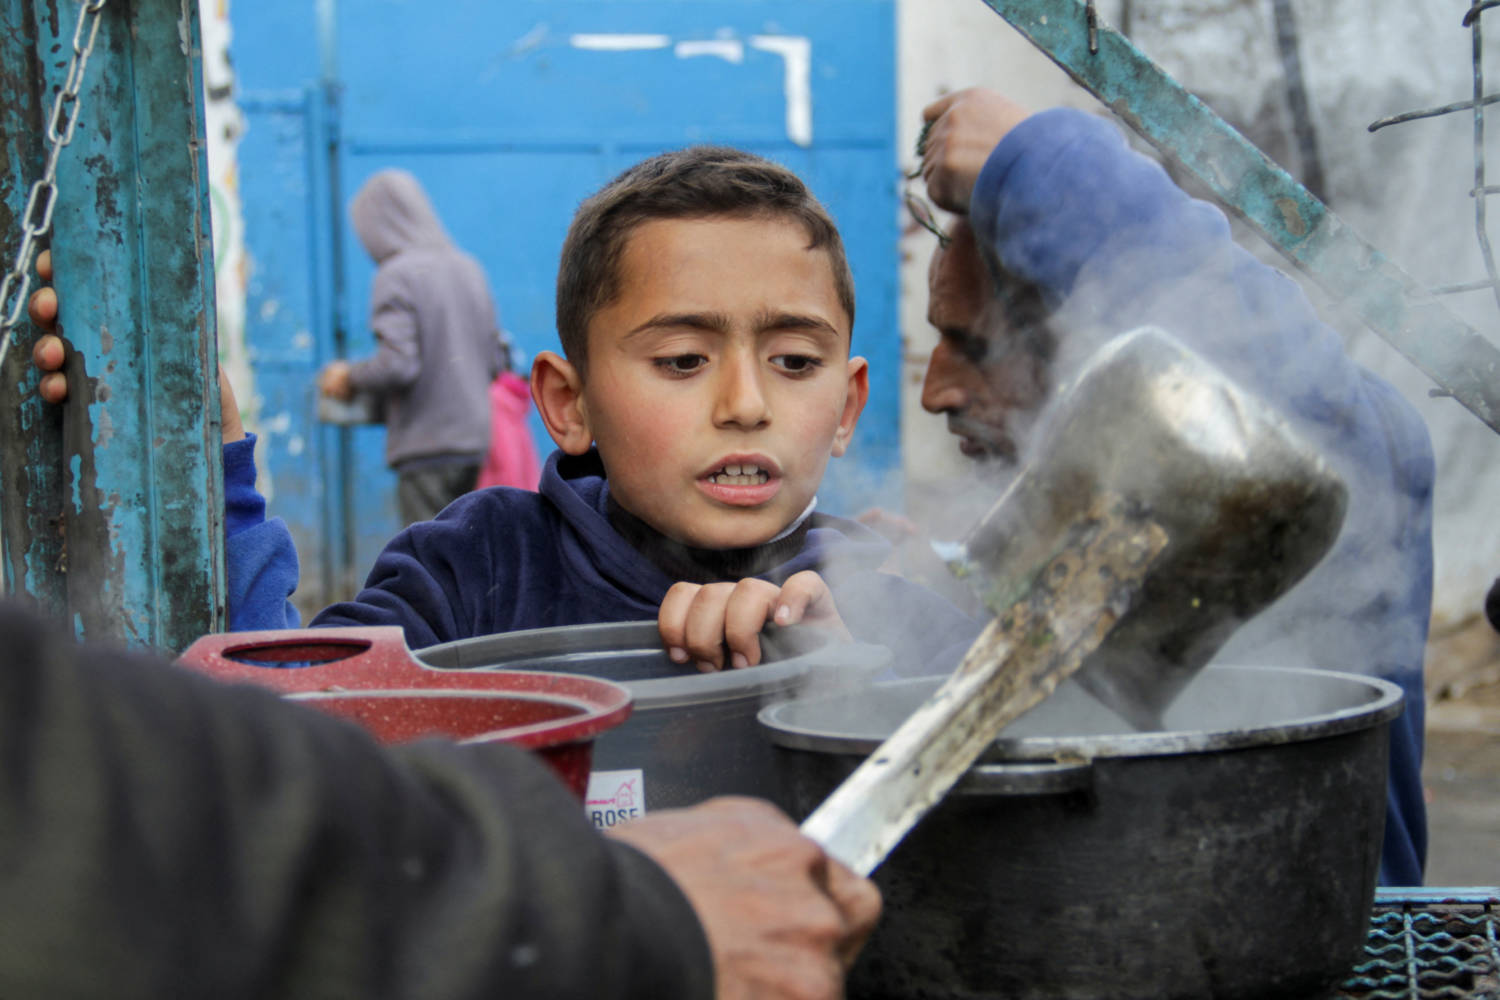 Palestinians Prepare Iftar Meal During The Holy Month Of Ramadan